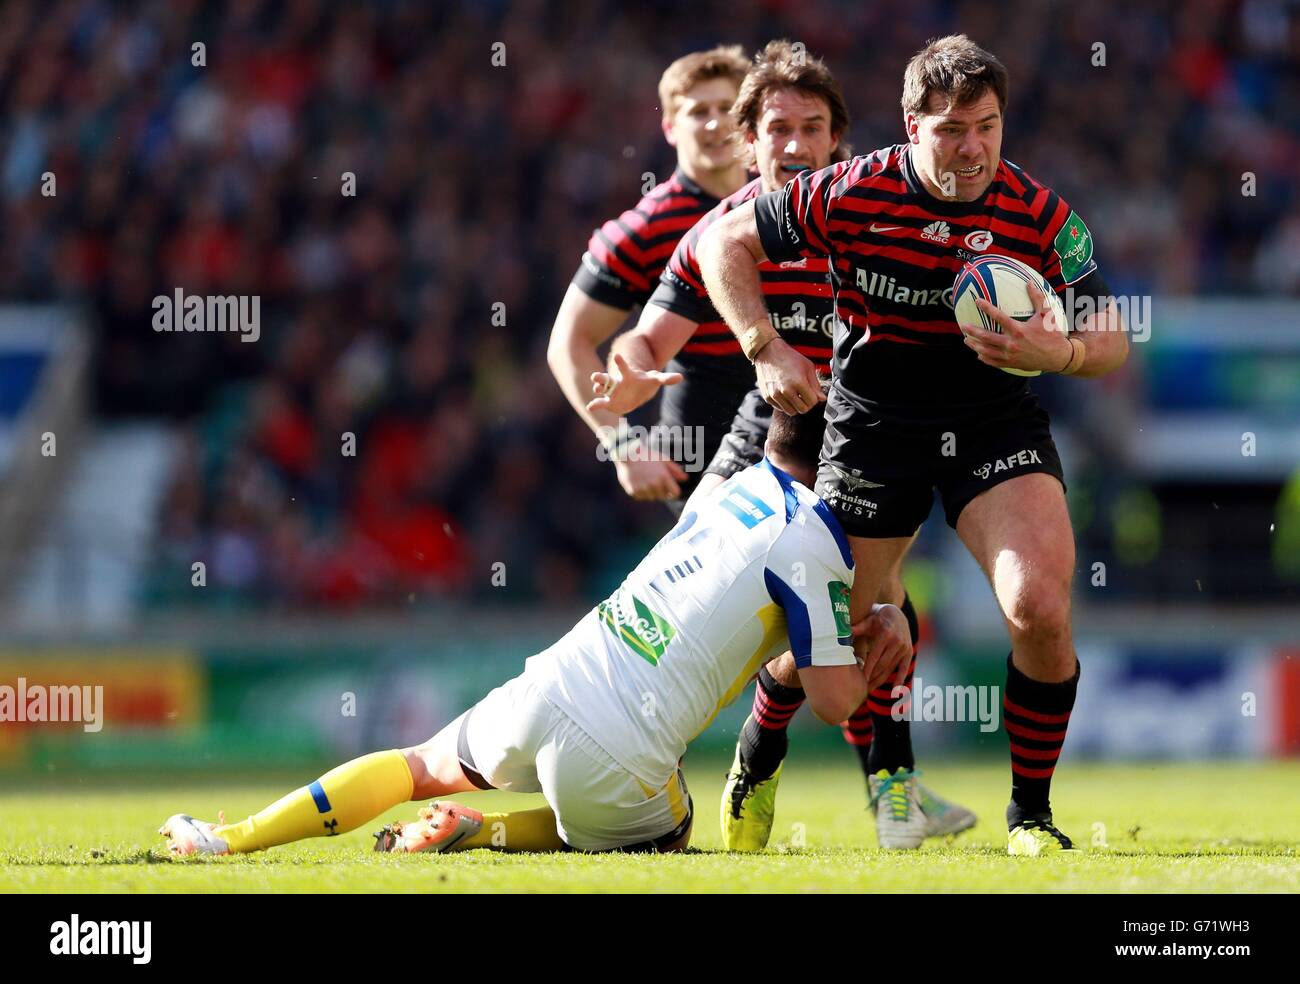 Saracens Schalk Brits is tackled by Clermont's Mike Delany during the Heineken Cup Semi Final match at Twickenham, London. Stock Photo